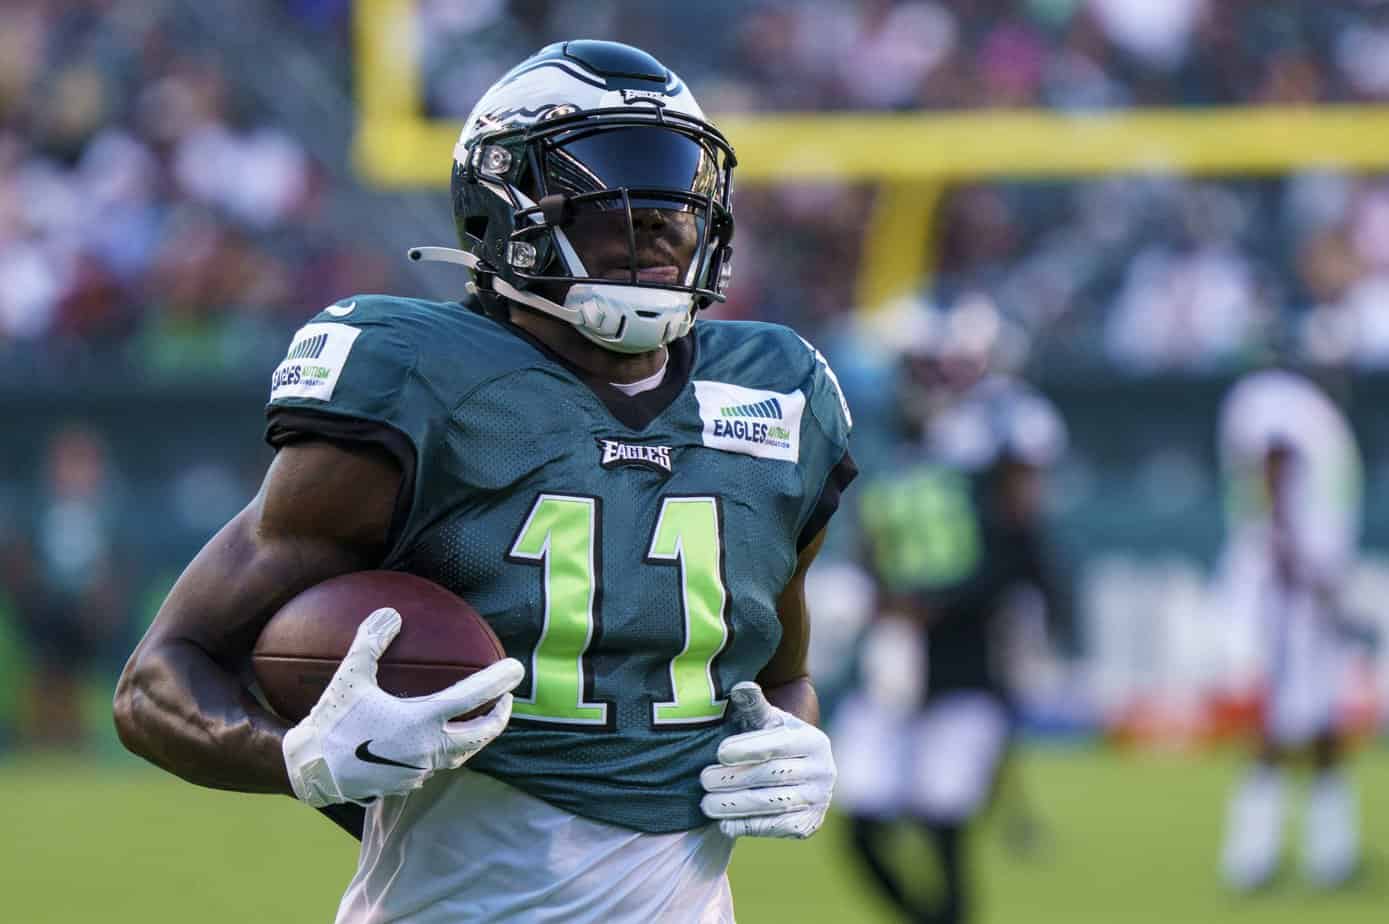 A look at the best NFL DFS wide receiver picks and DraftKings & FanDuel plays for Week 9. Our NFL DFS projections think...